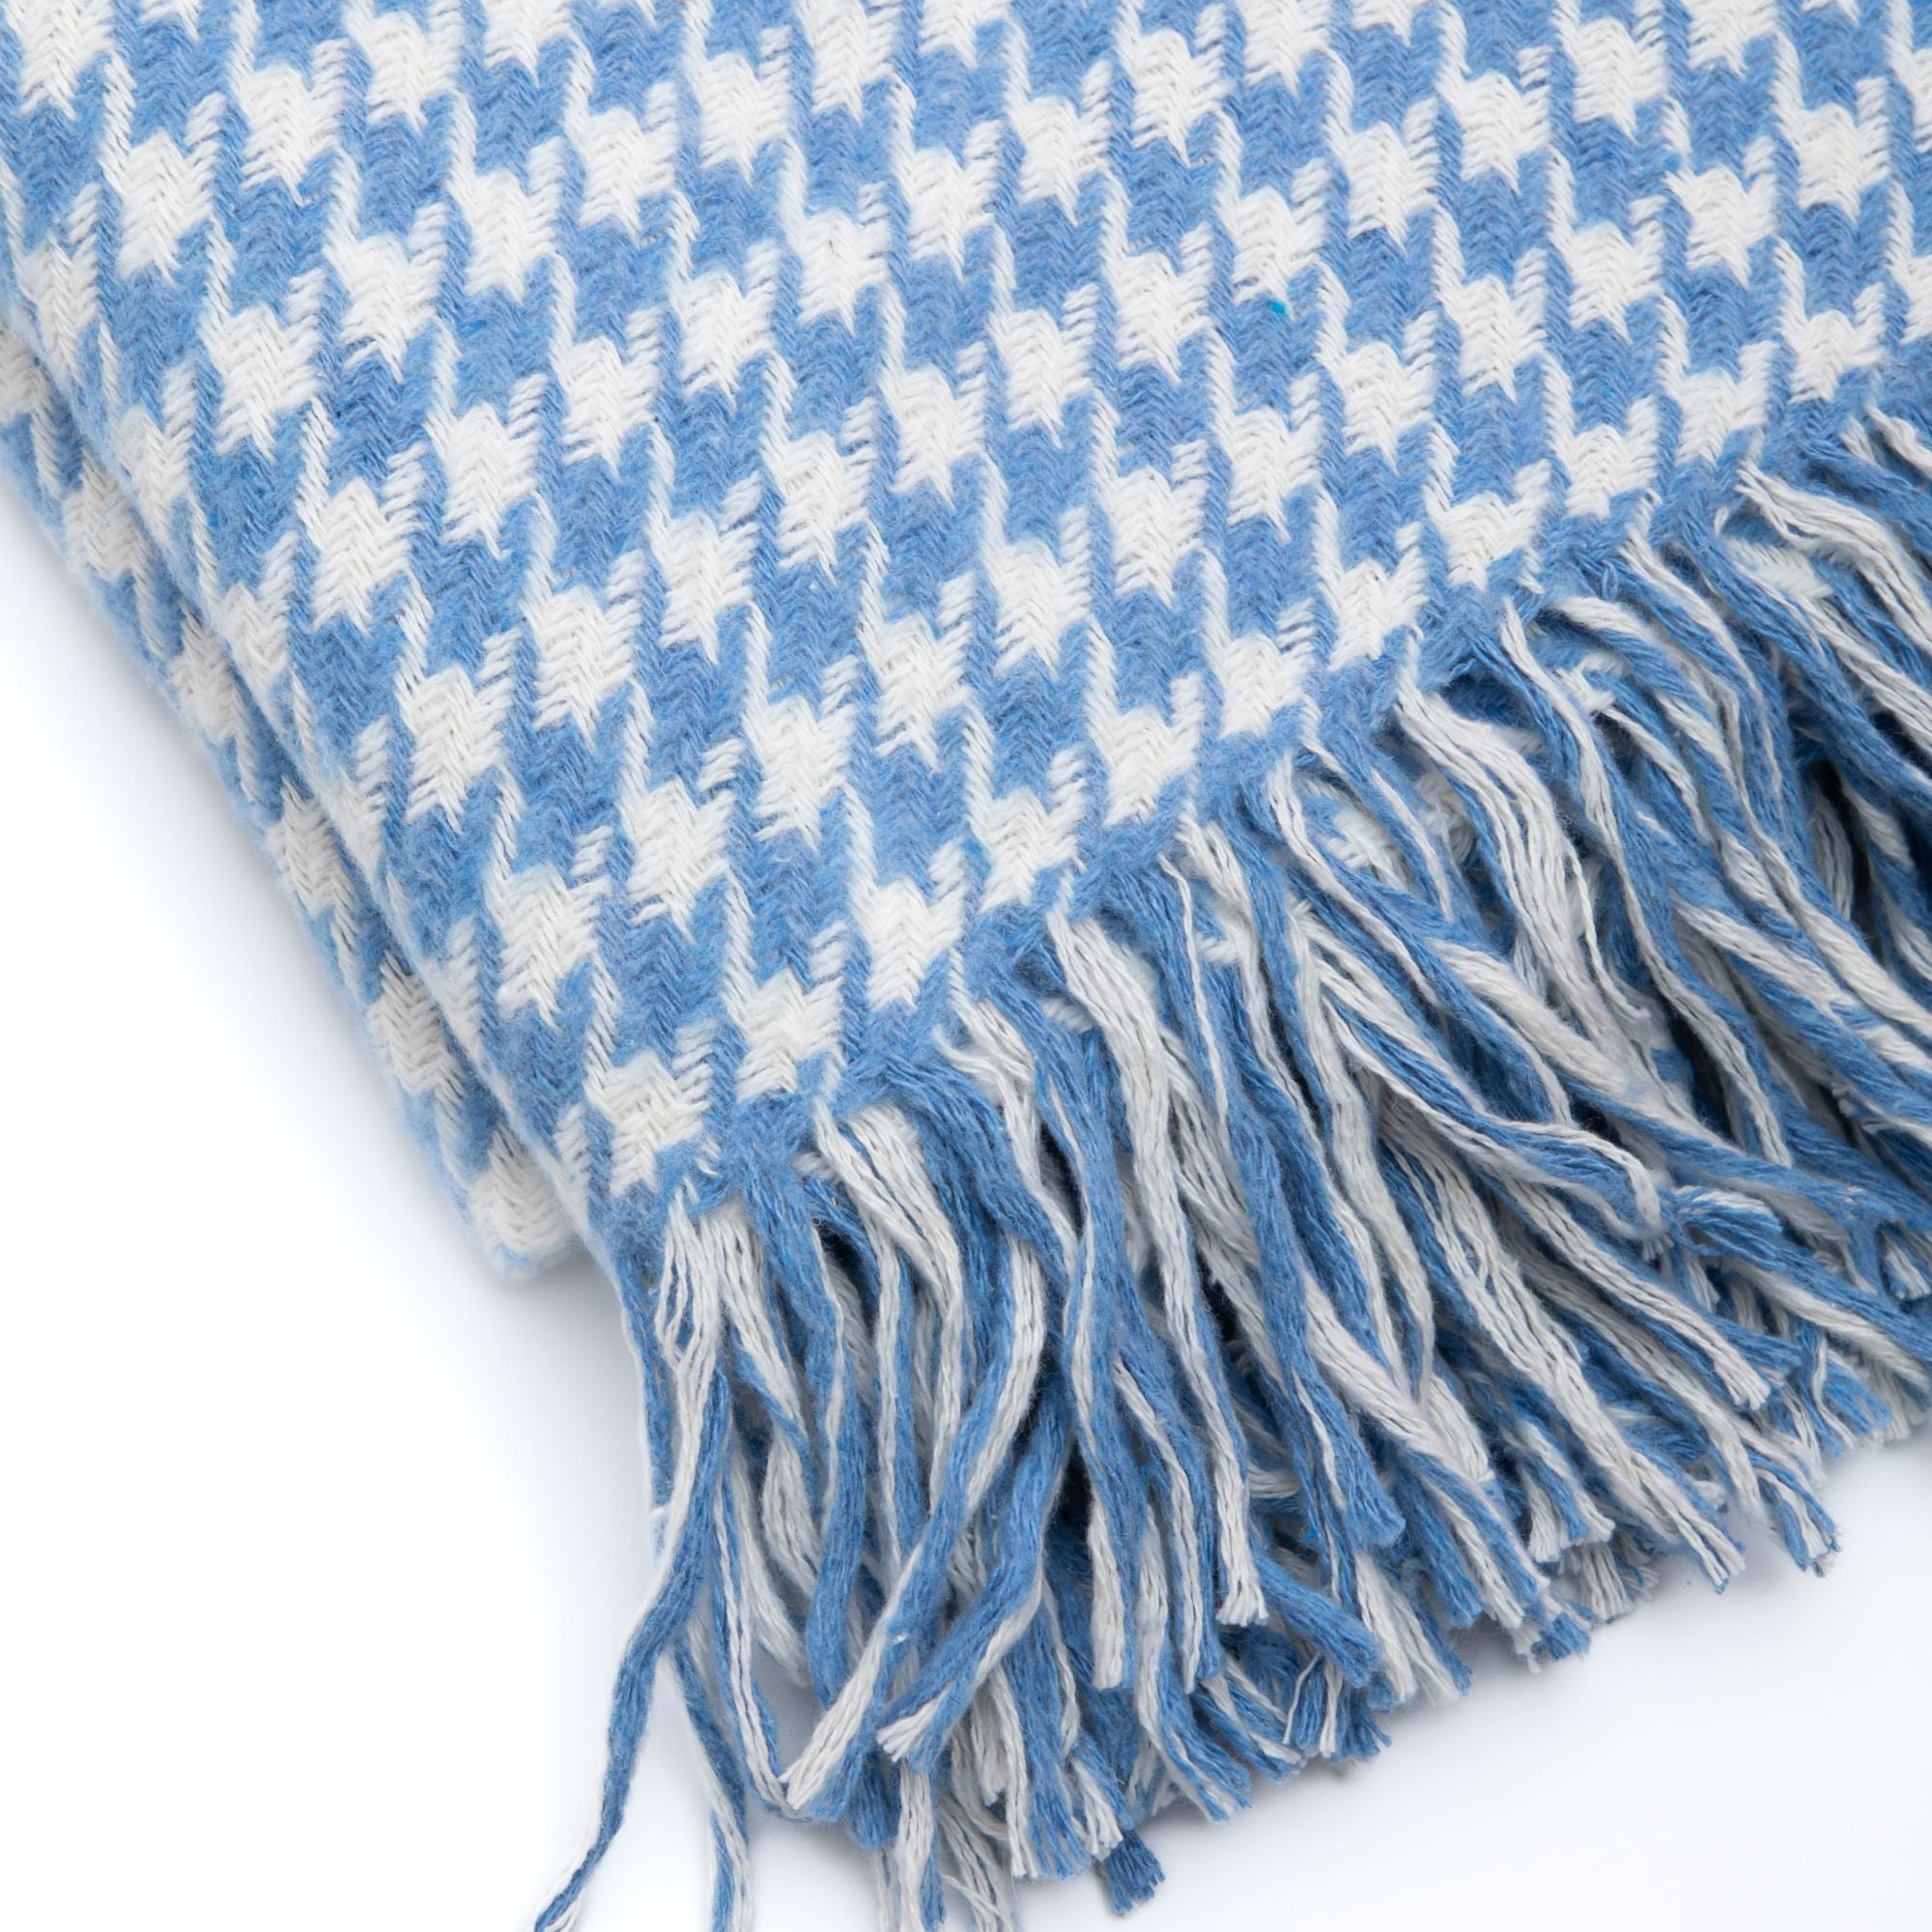 Trimita | Close-up view of the Blue Houndstooth Luxury Throw Blanket on a white background, highlighting the intricate weaving details and texture.